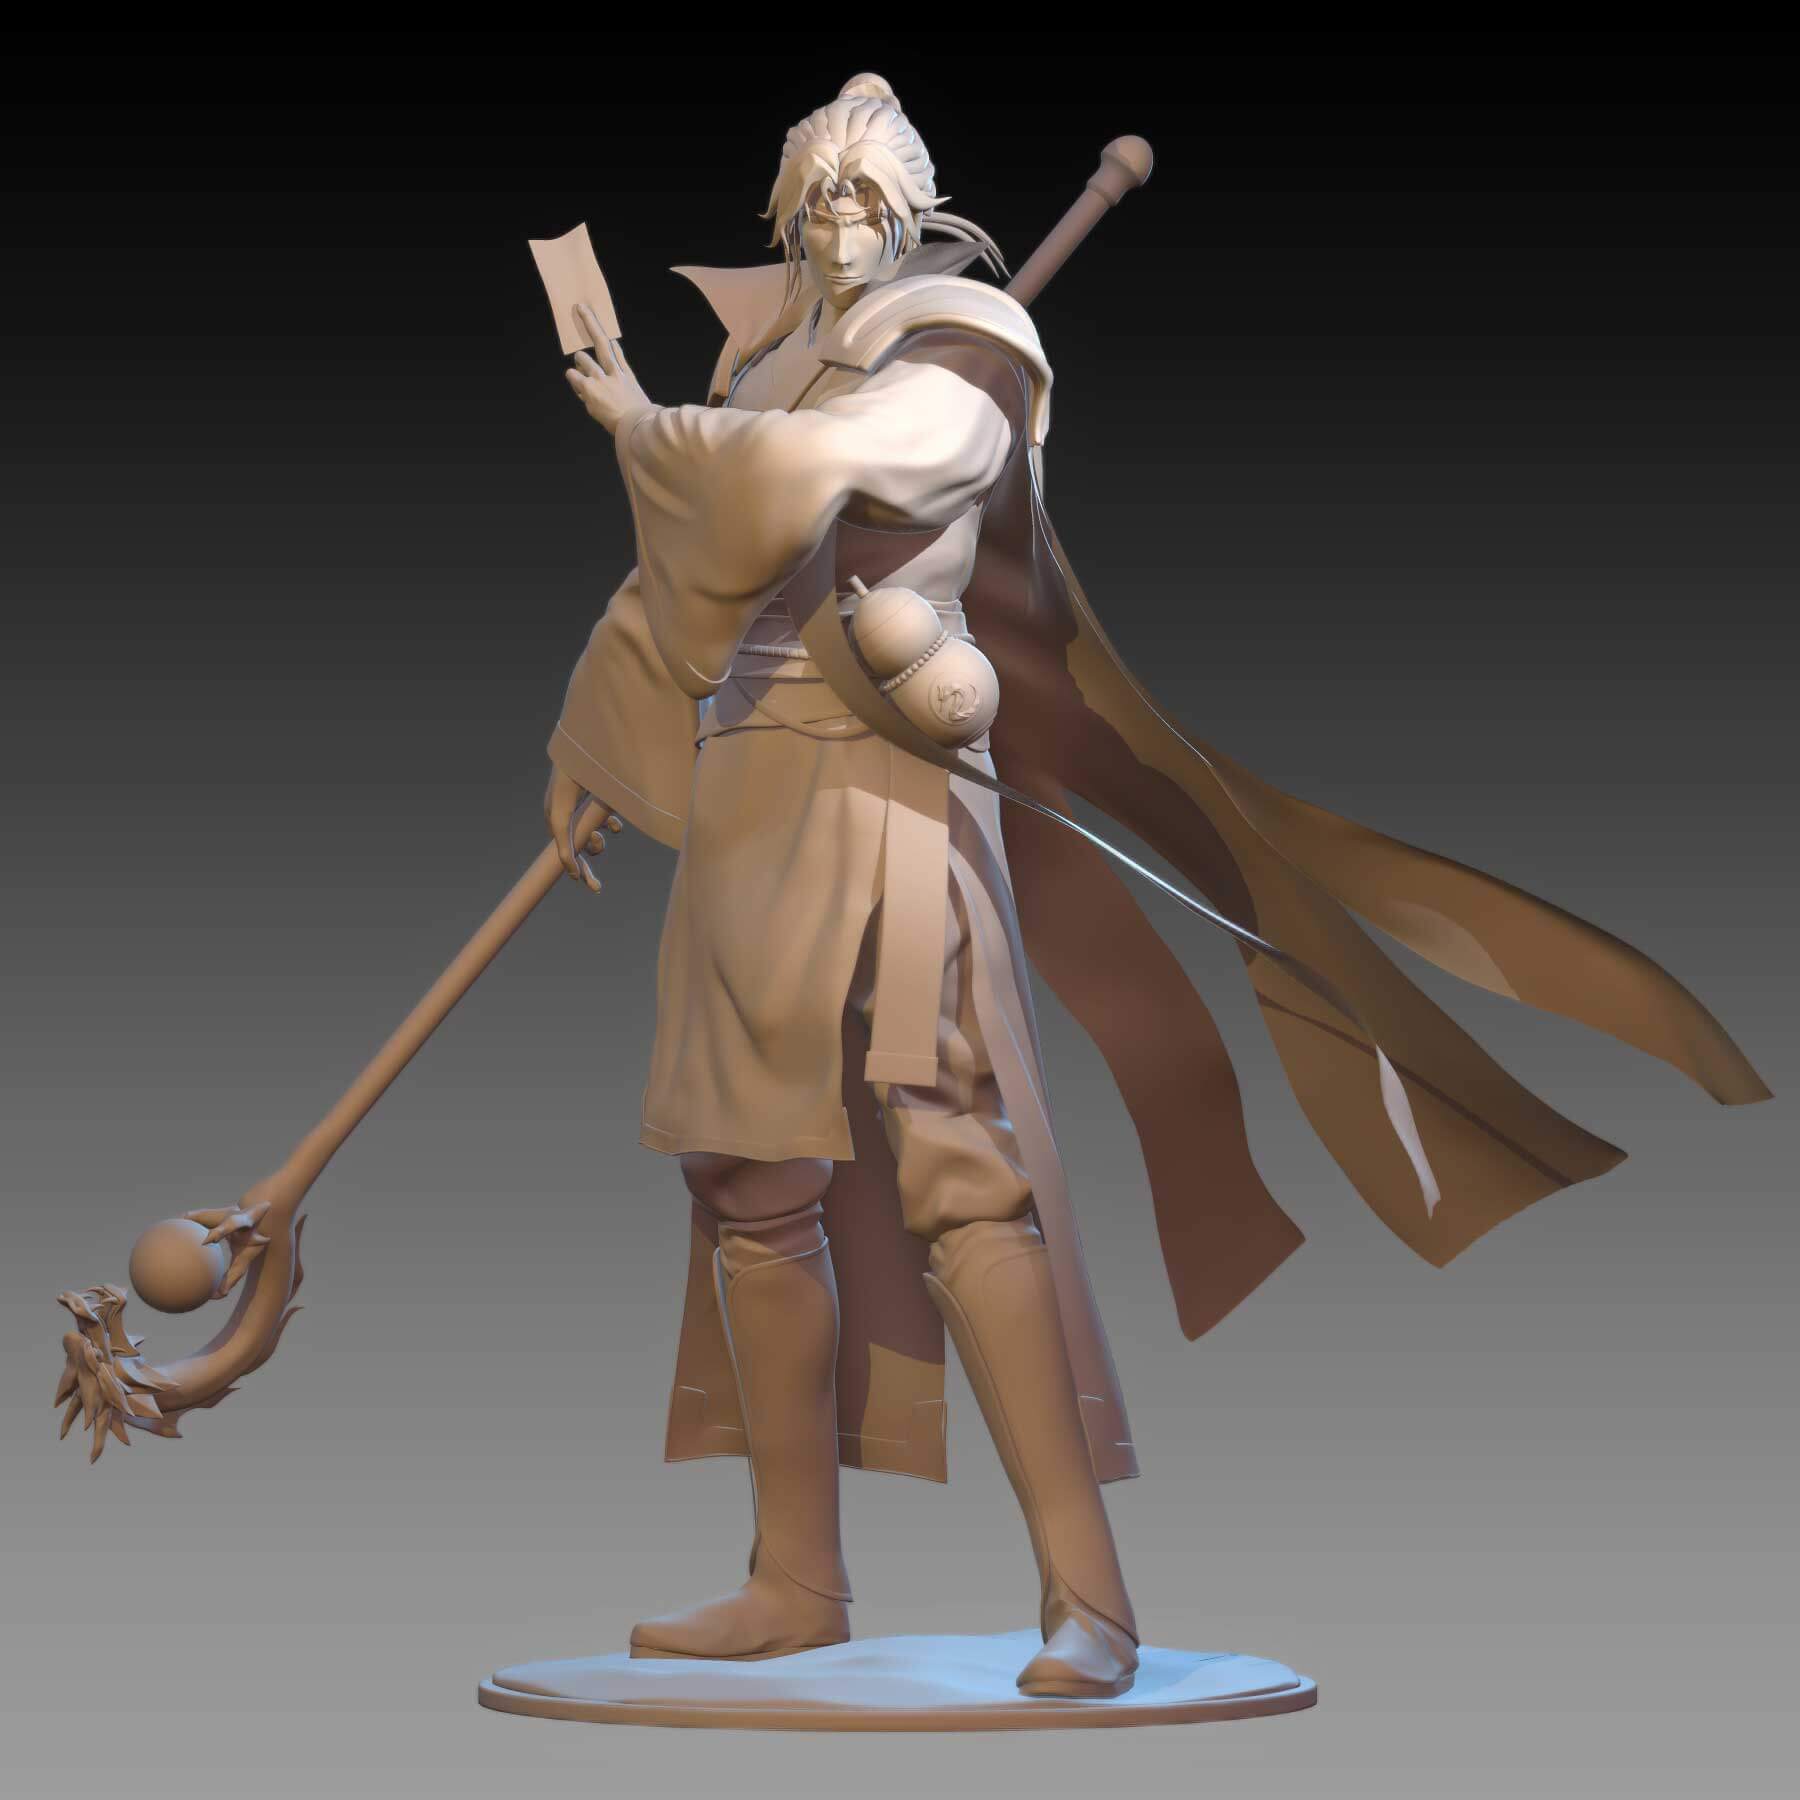 3D model of a man wielding a staff and paper ticket.